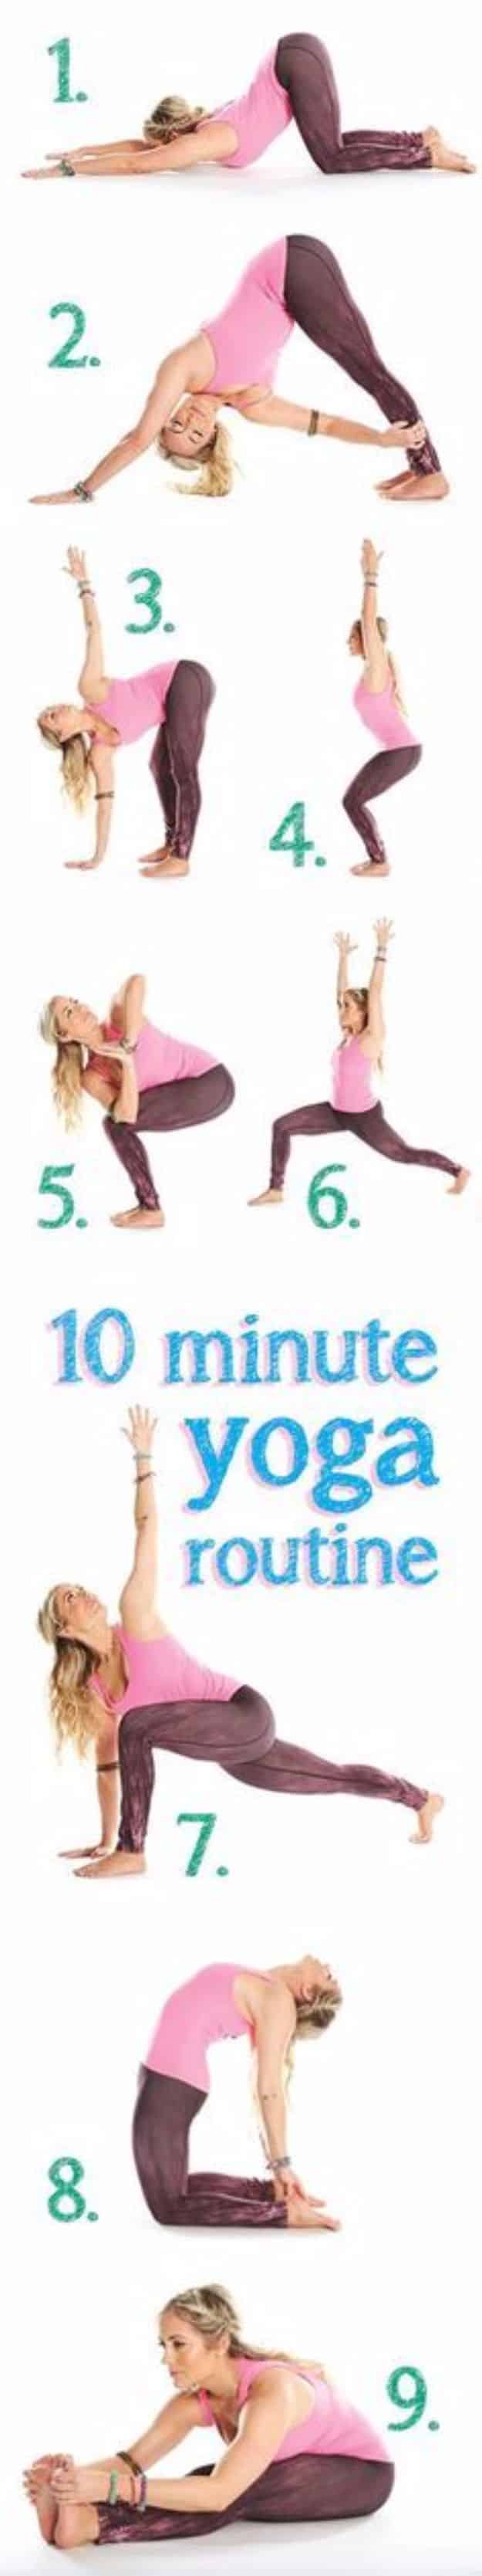 Best Quick At Home Workouts - 10 Minute Yoga Routine - Easy Tutorials and Work Out Ideas for Strength Training and Exercises - Step by Step Tutorials for Butt Workouts, Abs Tummy and Stomach, Legs, Arms, Chest and Back - Fast 5 and 10 Minute Workouts You Can Do On Your Lunch Break, In Car, in Hotel #exercise #health